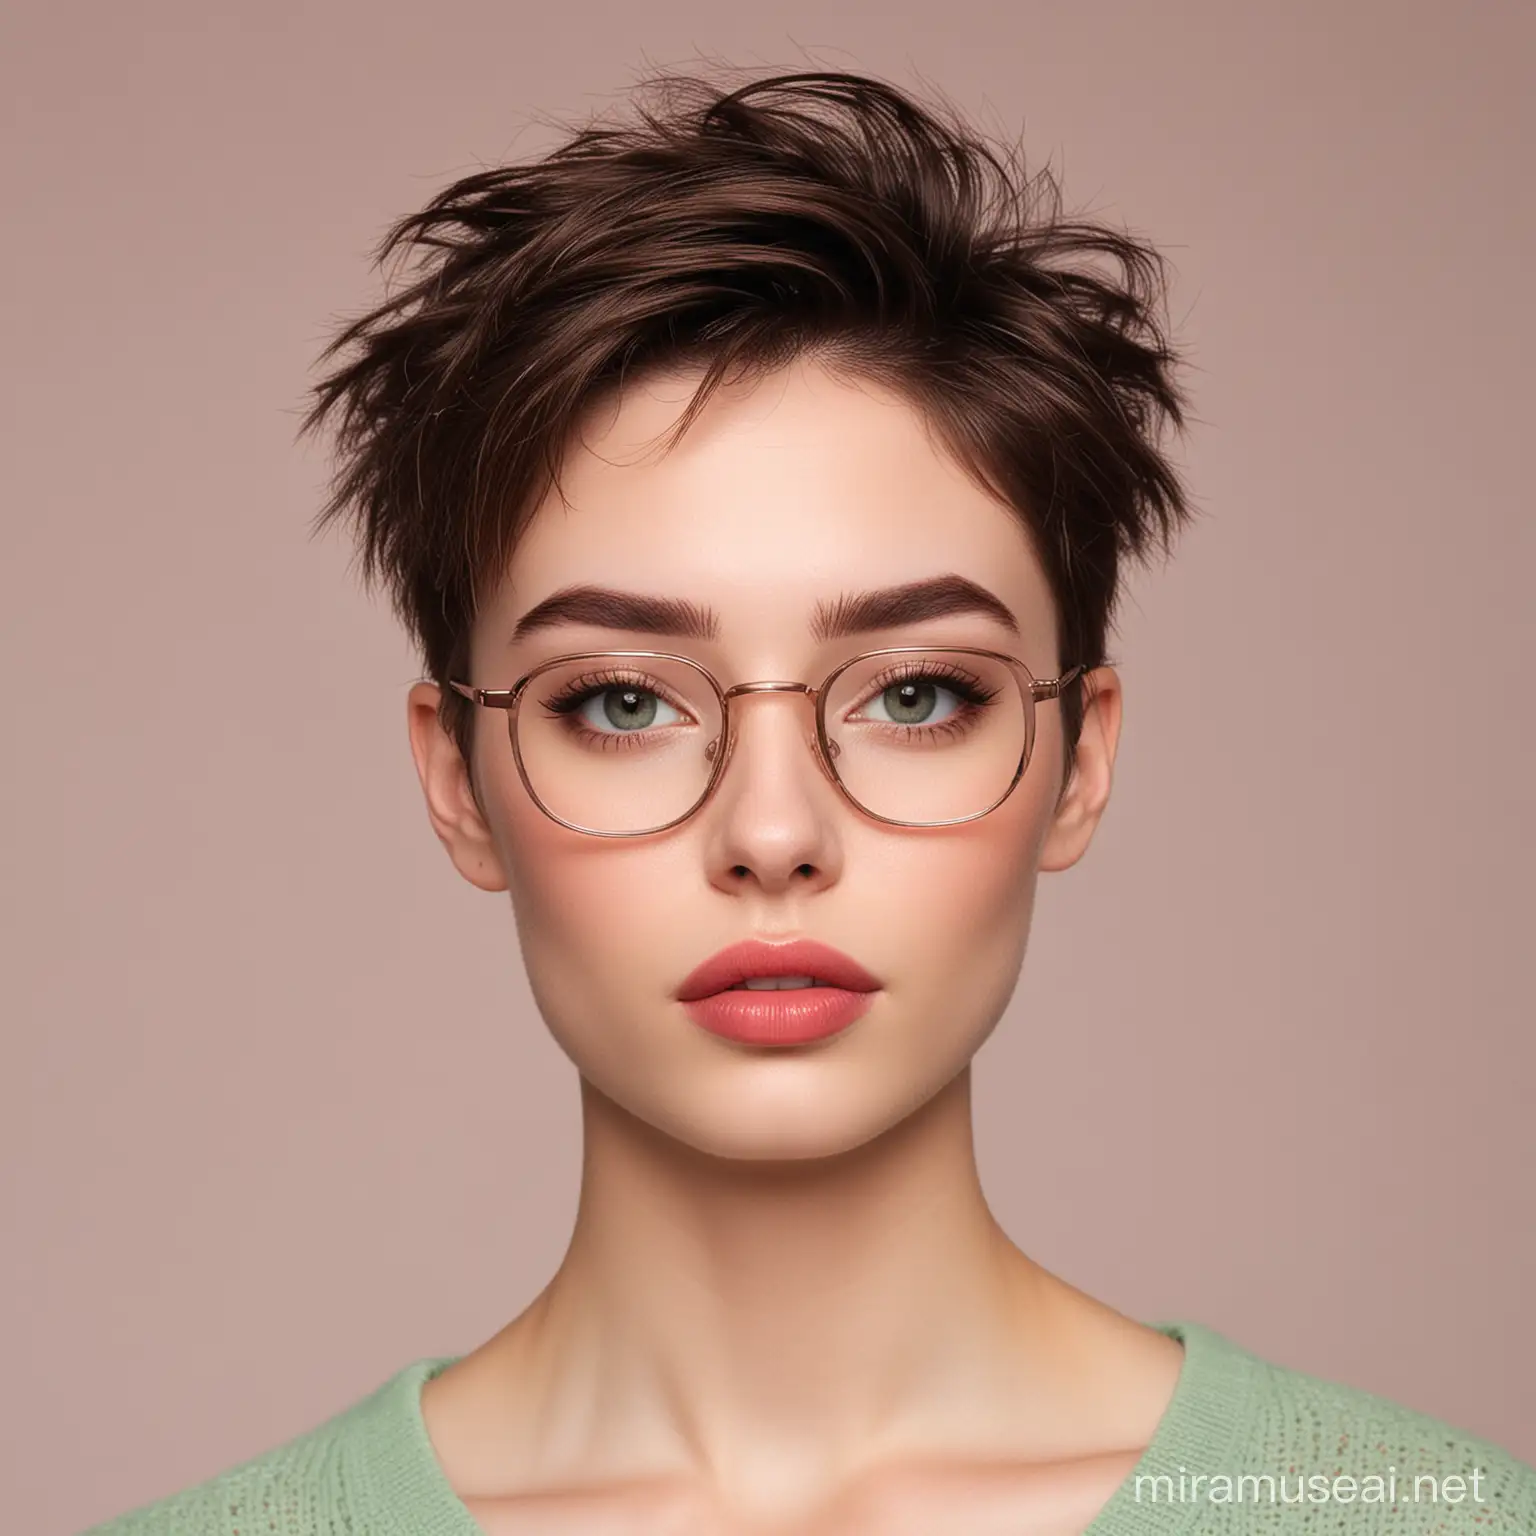 androgynous person with pale skin, yellow undertones, broad and upturned nose, square face shape, feathery brown eyebrows, thin pale pink lips, wide almond shaped brown eyes, square glasses with teal frame, dark brown hair with red tips, short hair, wide face